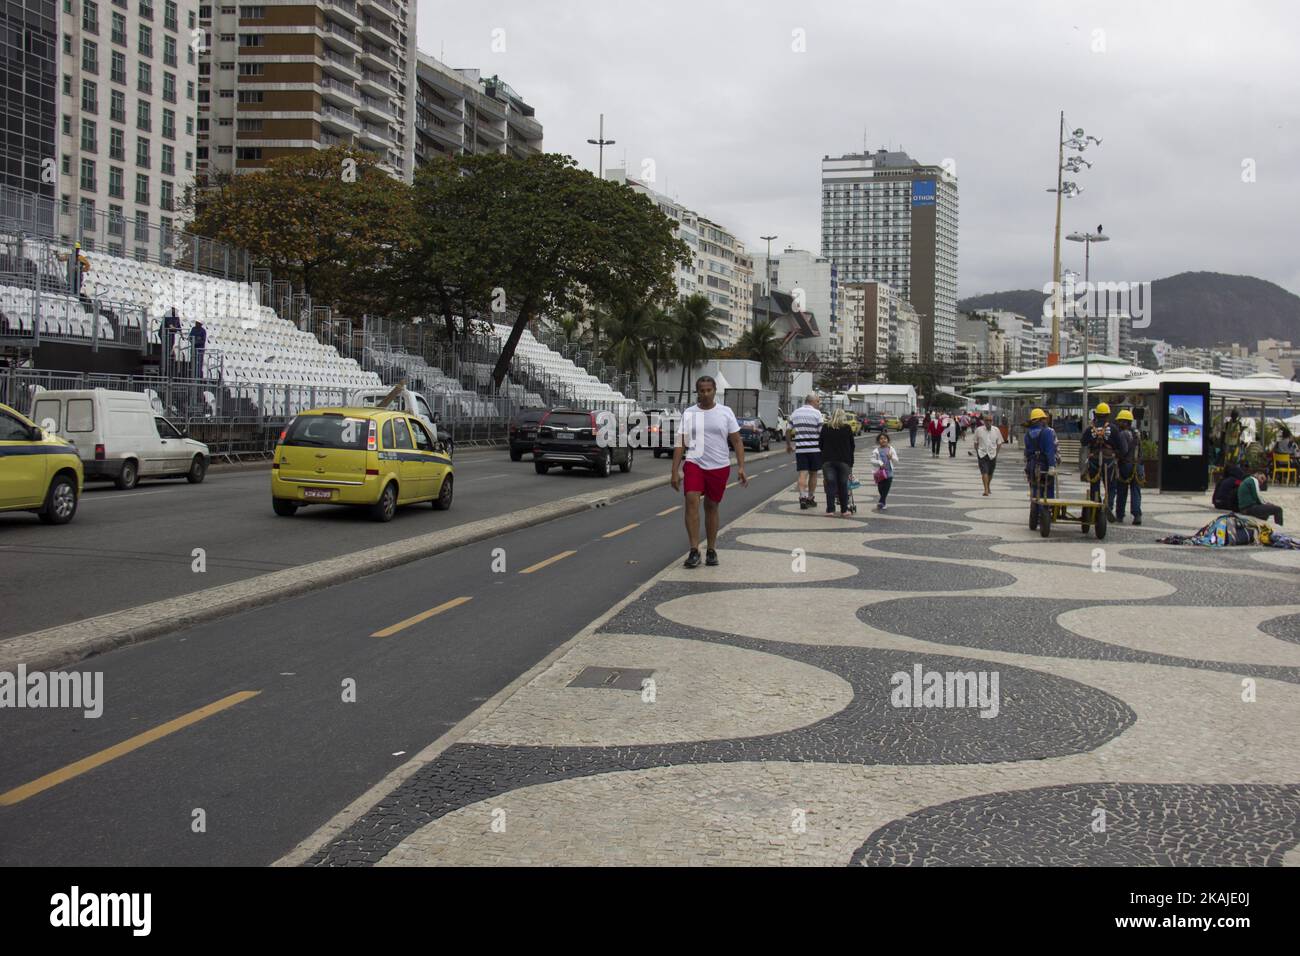 Rio de Janeiro, Brazil, 21 July 2016: Missing a few days to the start of the Olympic Games Rio 2016, Copacabana, the most famous beach of the city, gets the finishing touches to get the Olympic competitions to be held there. On site will be played the Marathon Swimming, road cycling and Pentathlon. The stands for the public have been installed. (Photo by Luiz Souza/NurPhoto) *** Please Use Credit from Credit Field *** Stock Photo